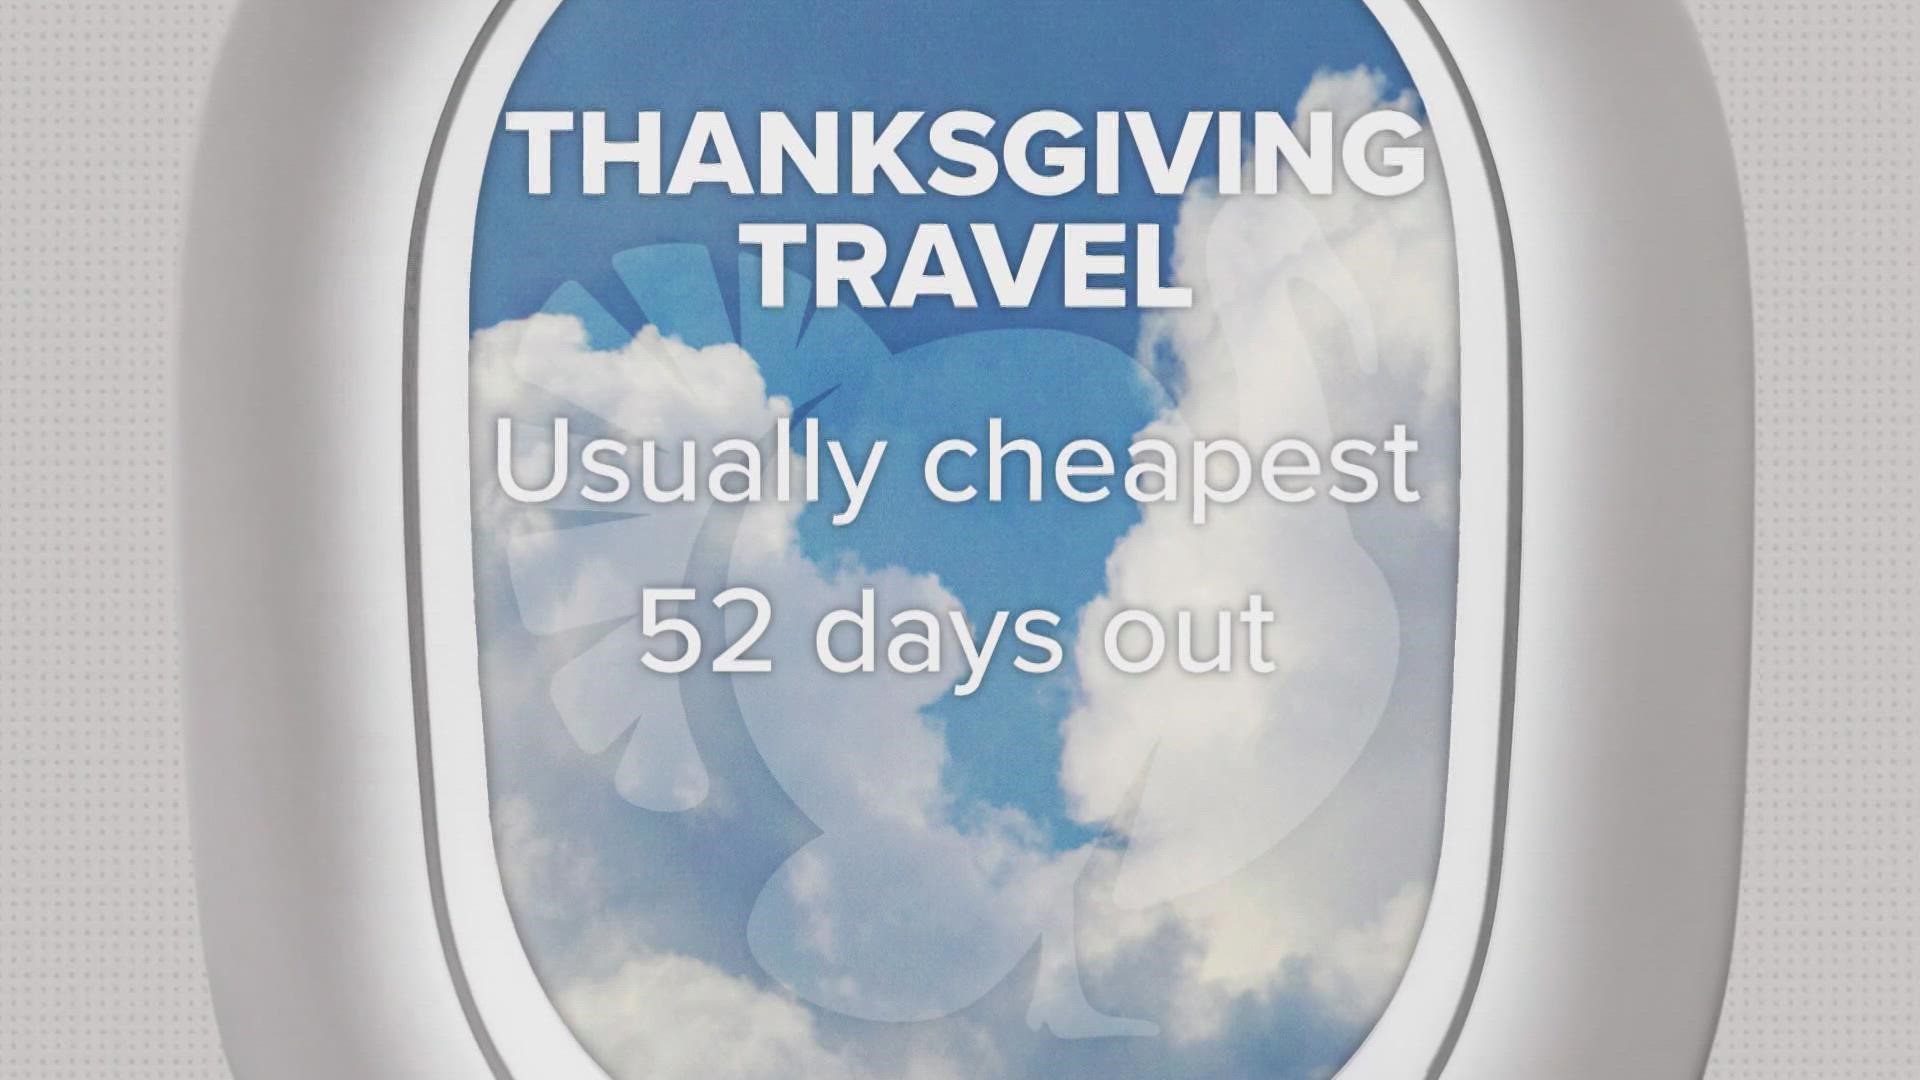 One travel analysis estimates that jetting away for Thanksgiving will be 25% more expensive this year than it was last year.